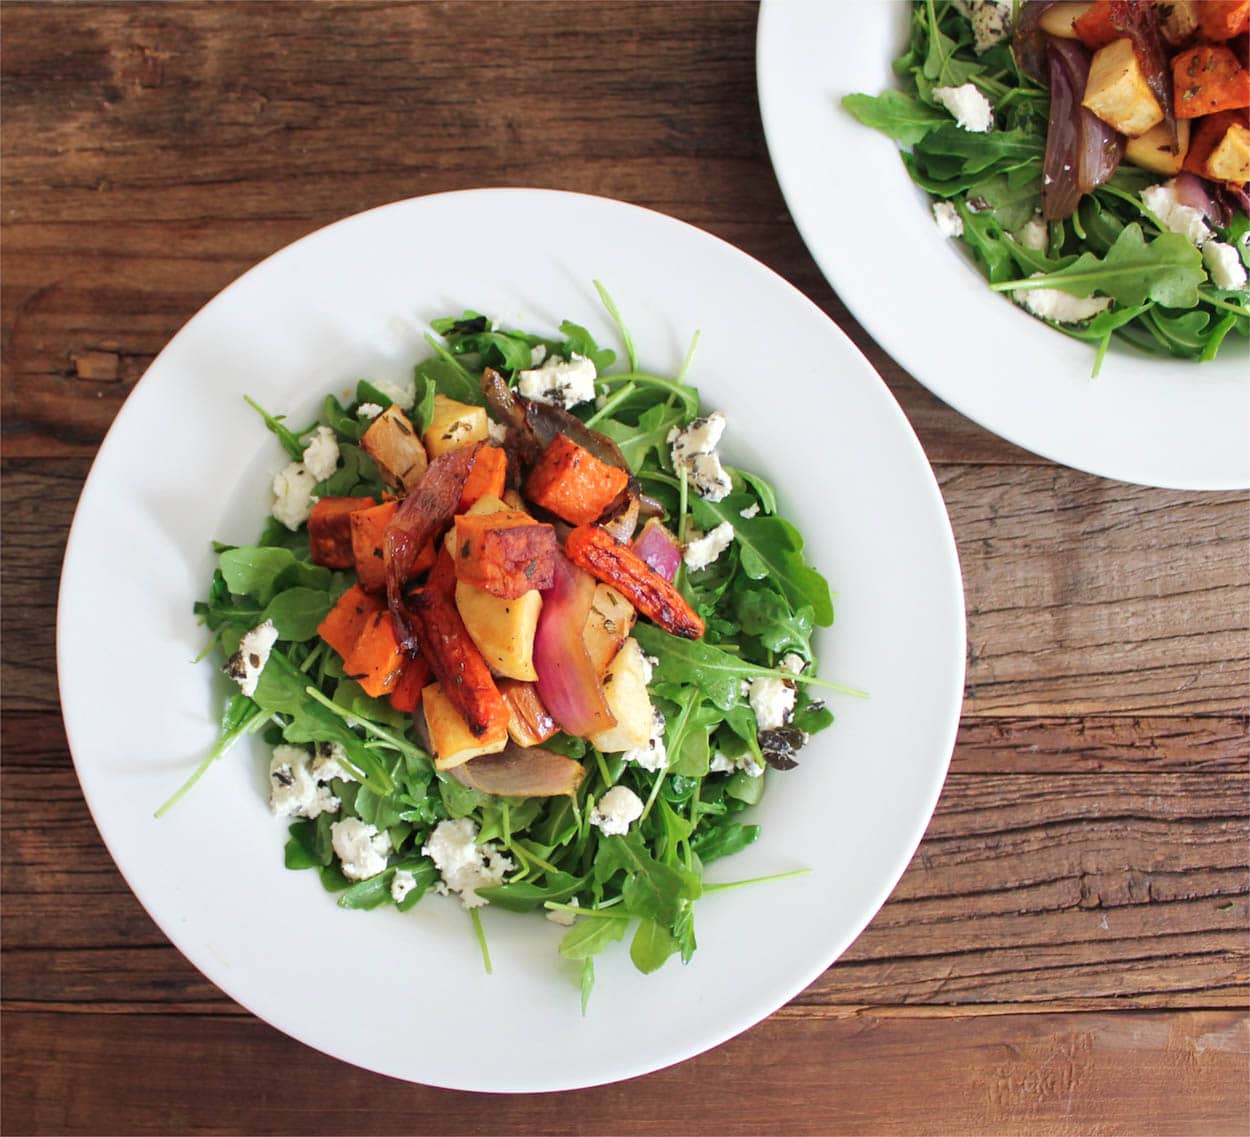 Roasted-Root-Vegetable-Salad-with-Herbed-Goat-Cheese-and-Arugula-5